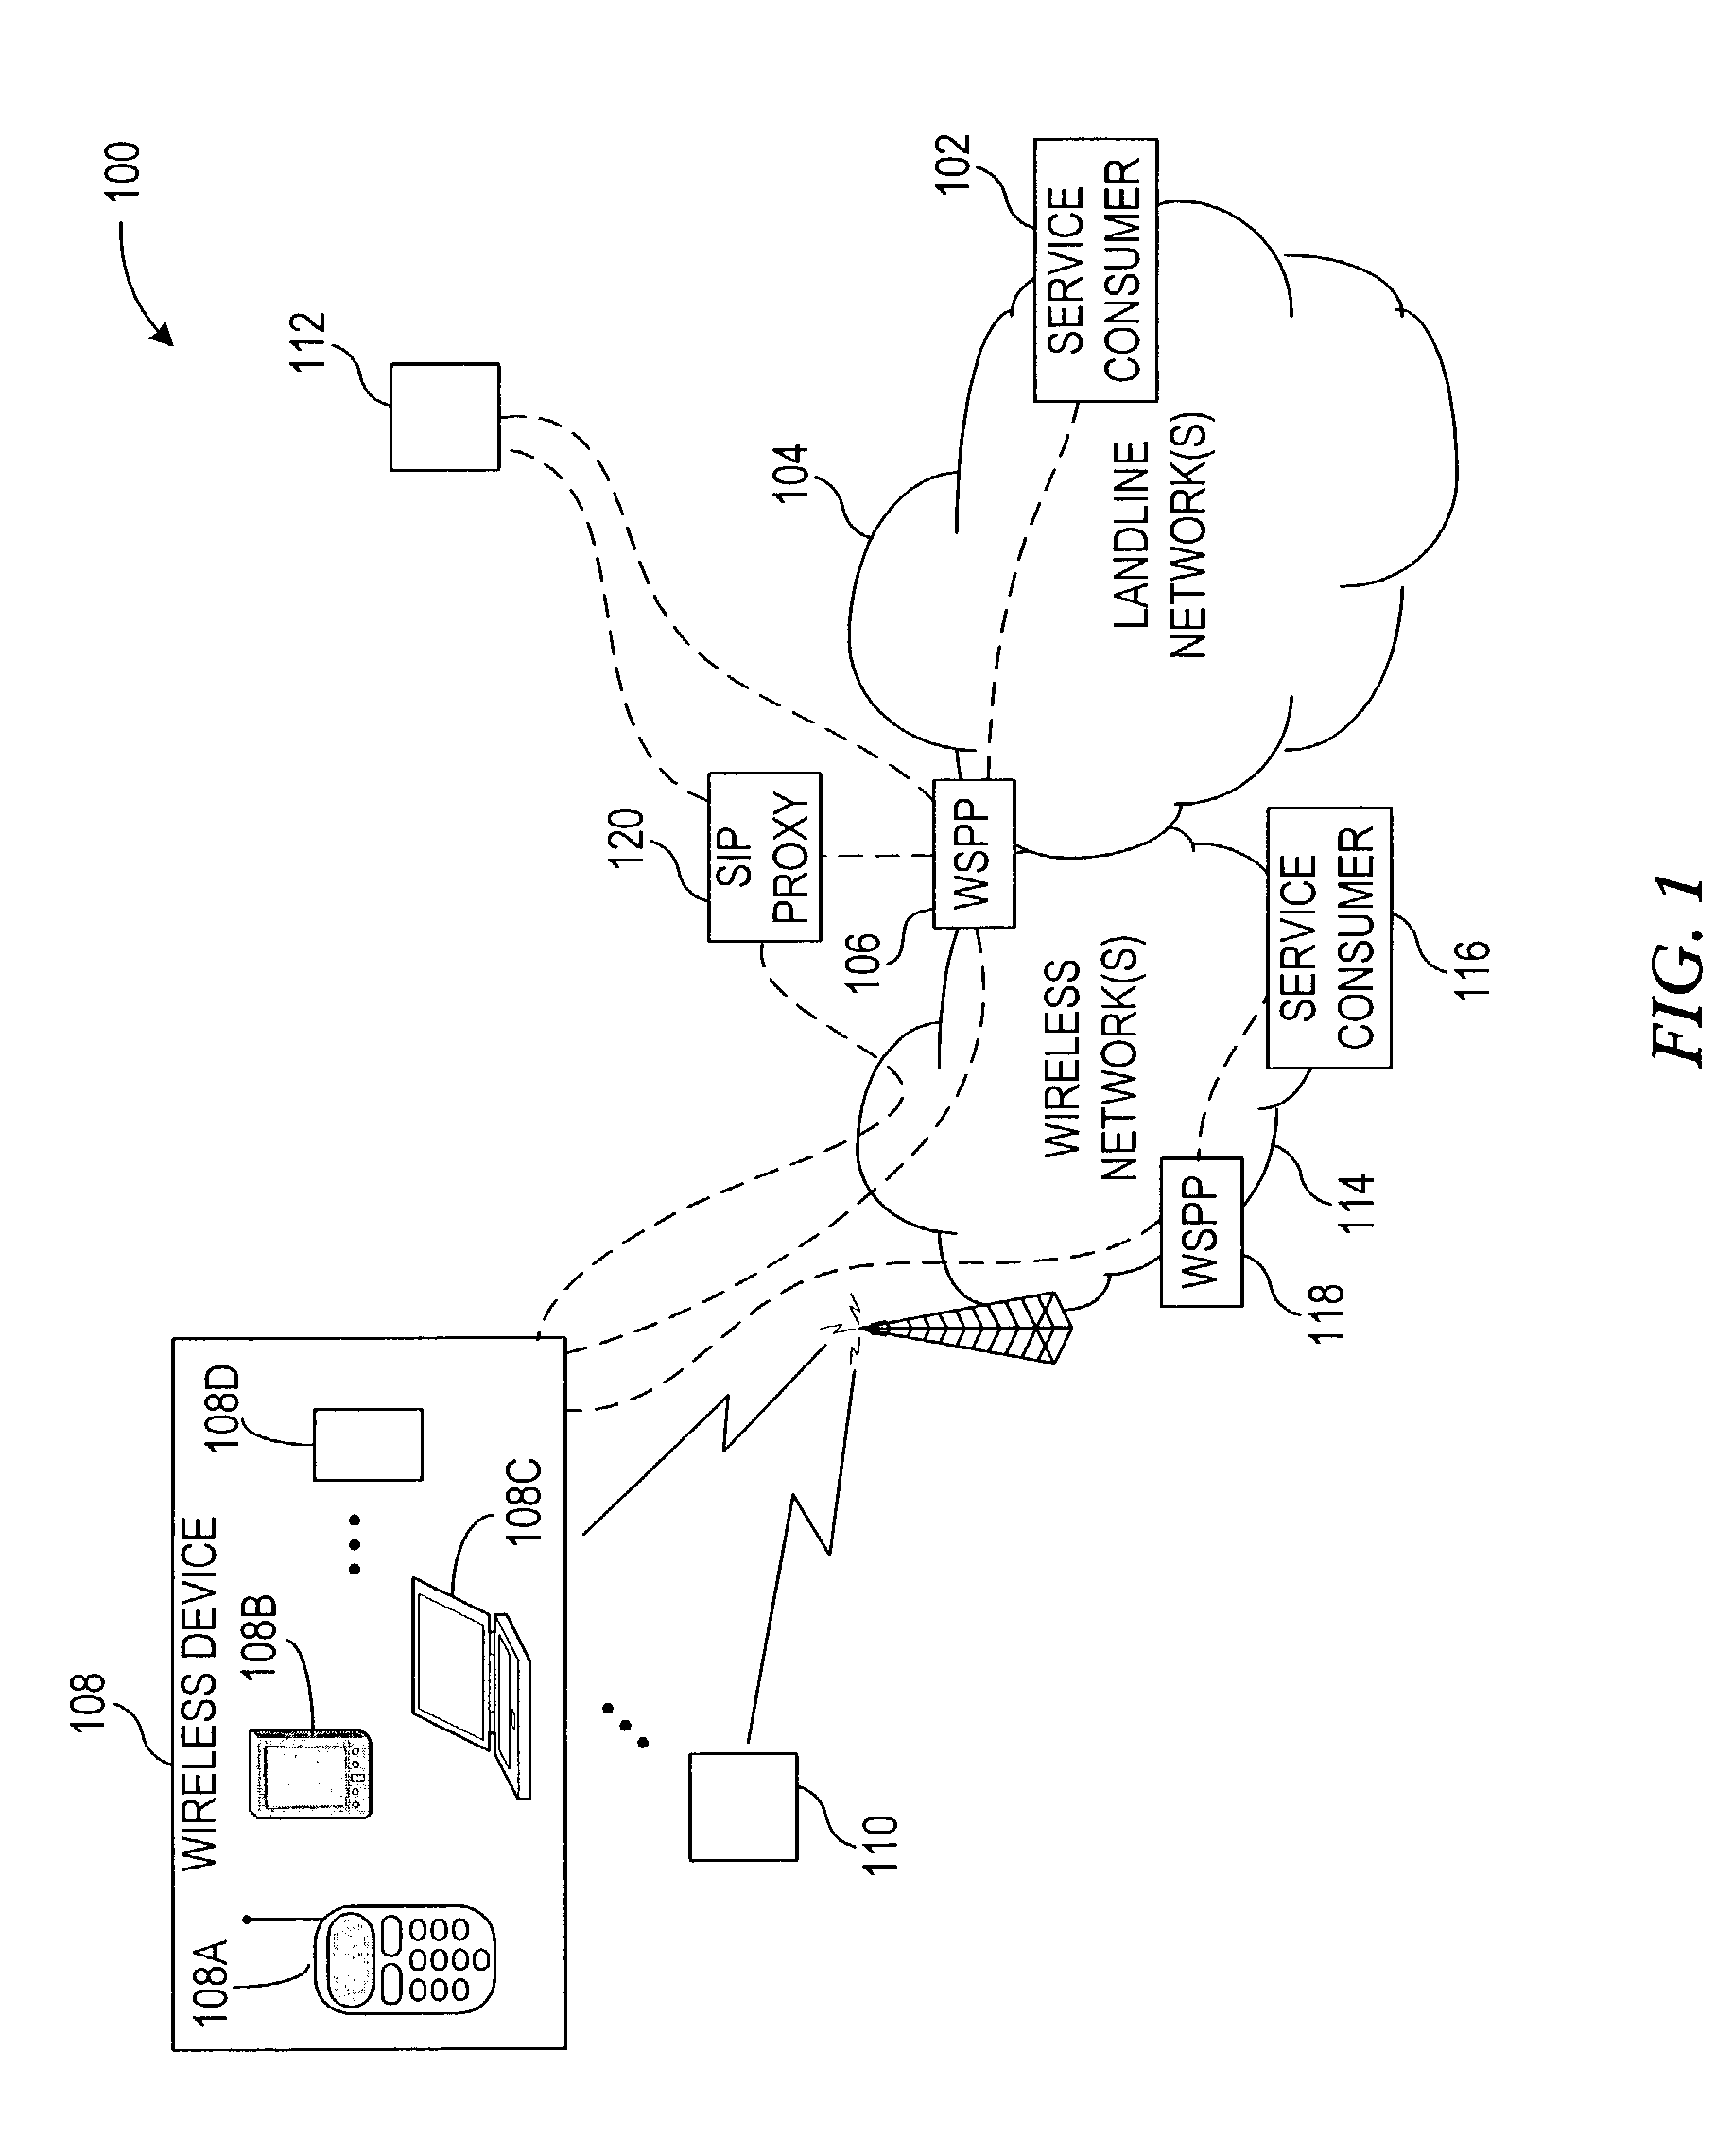 System and method for addressing networked terminals via pseudonym translation